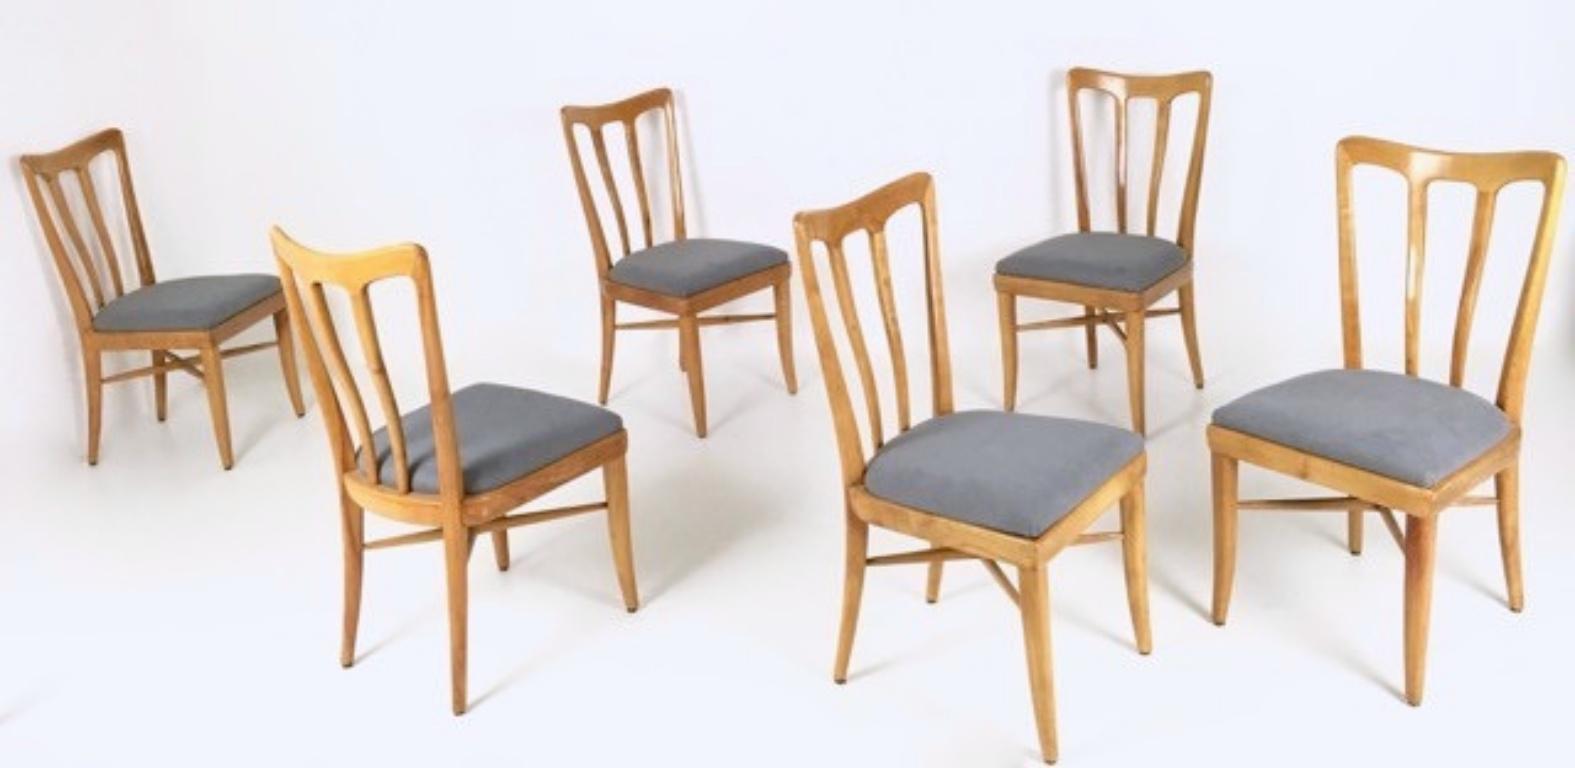 Their design is ascribable to Guglielmo Ulrich.
These dining chairs feature a cherry frame and grey fabric upholstery.
They might show slight traces of use since they're vintage, but they can be considered as in excellent original condition and